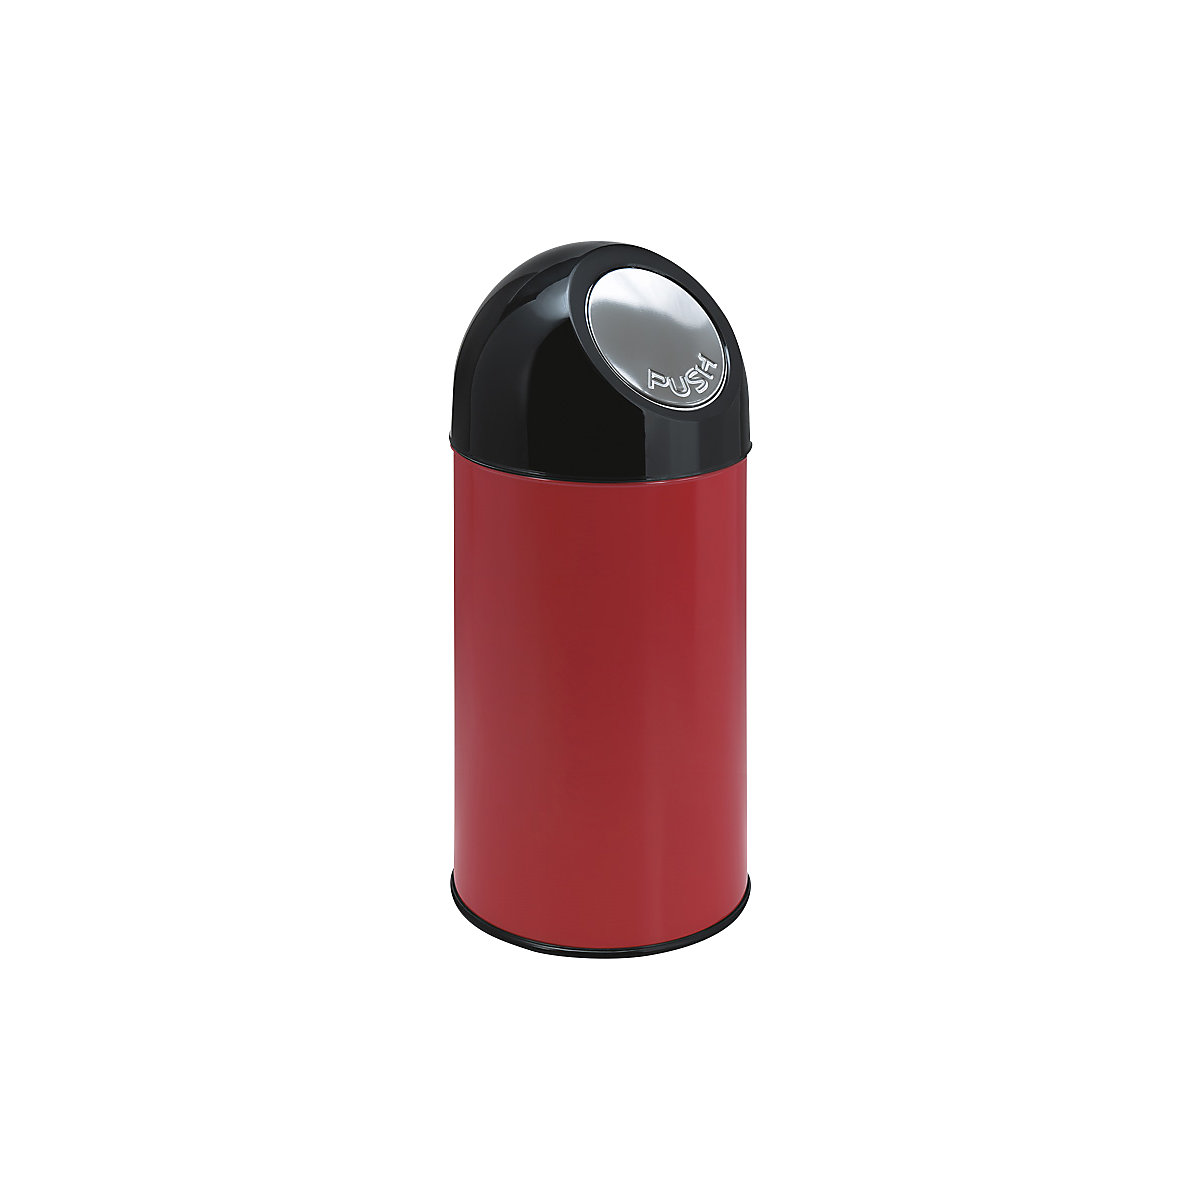 Push rubbish bin, capacity 40 l, zinc plated inner container, red